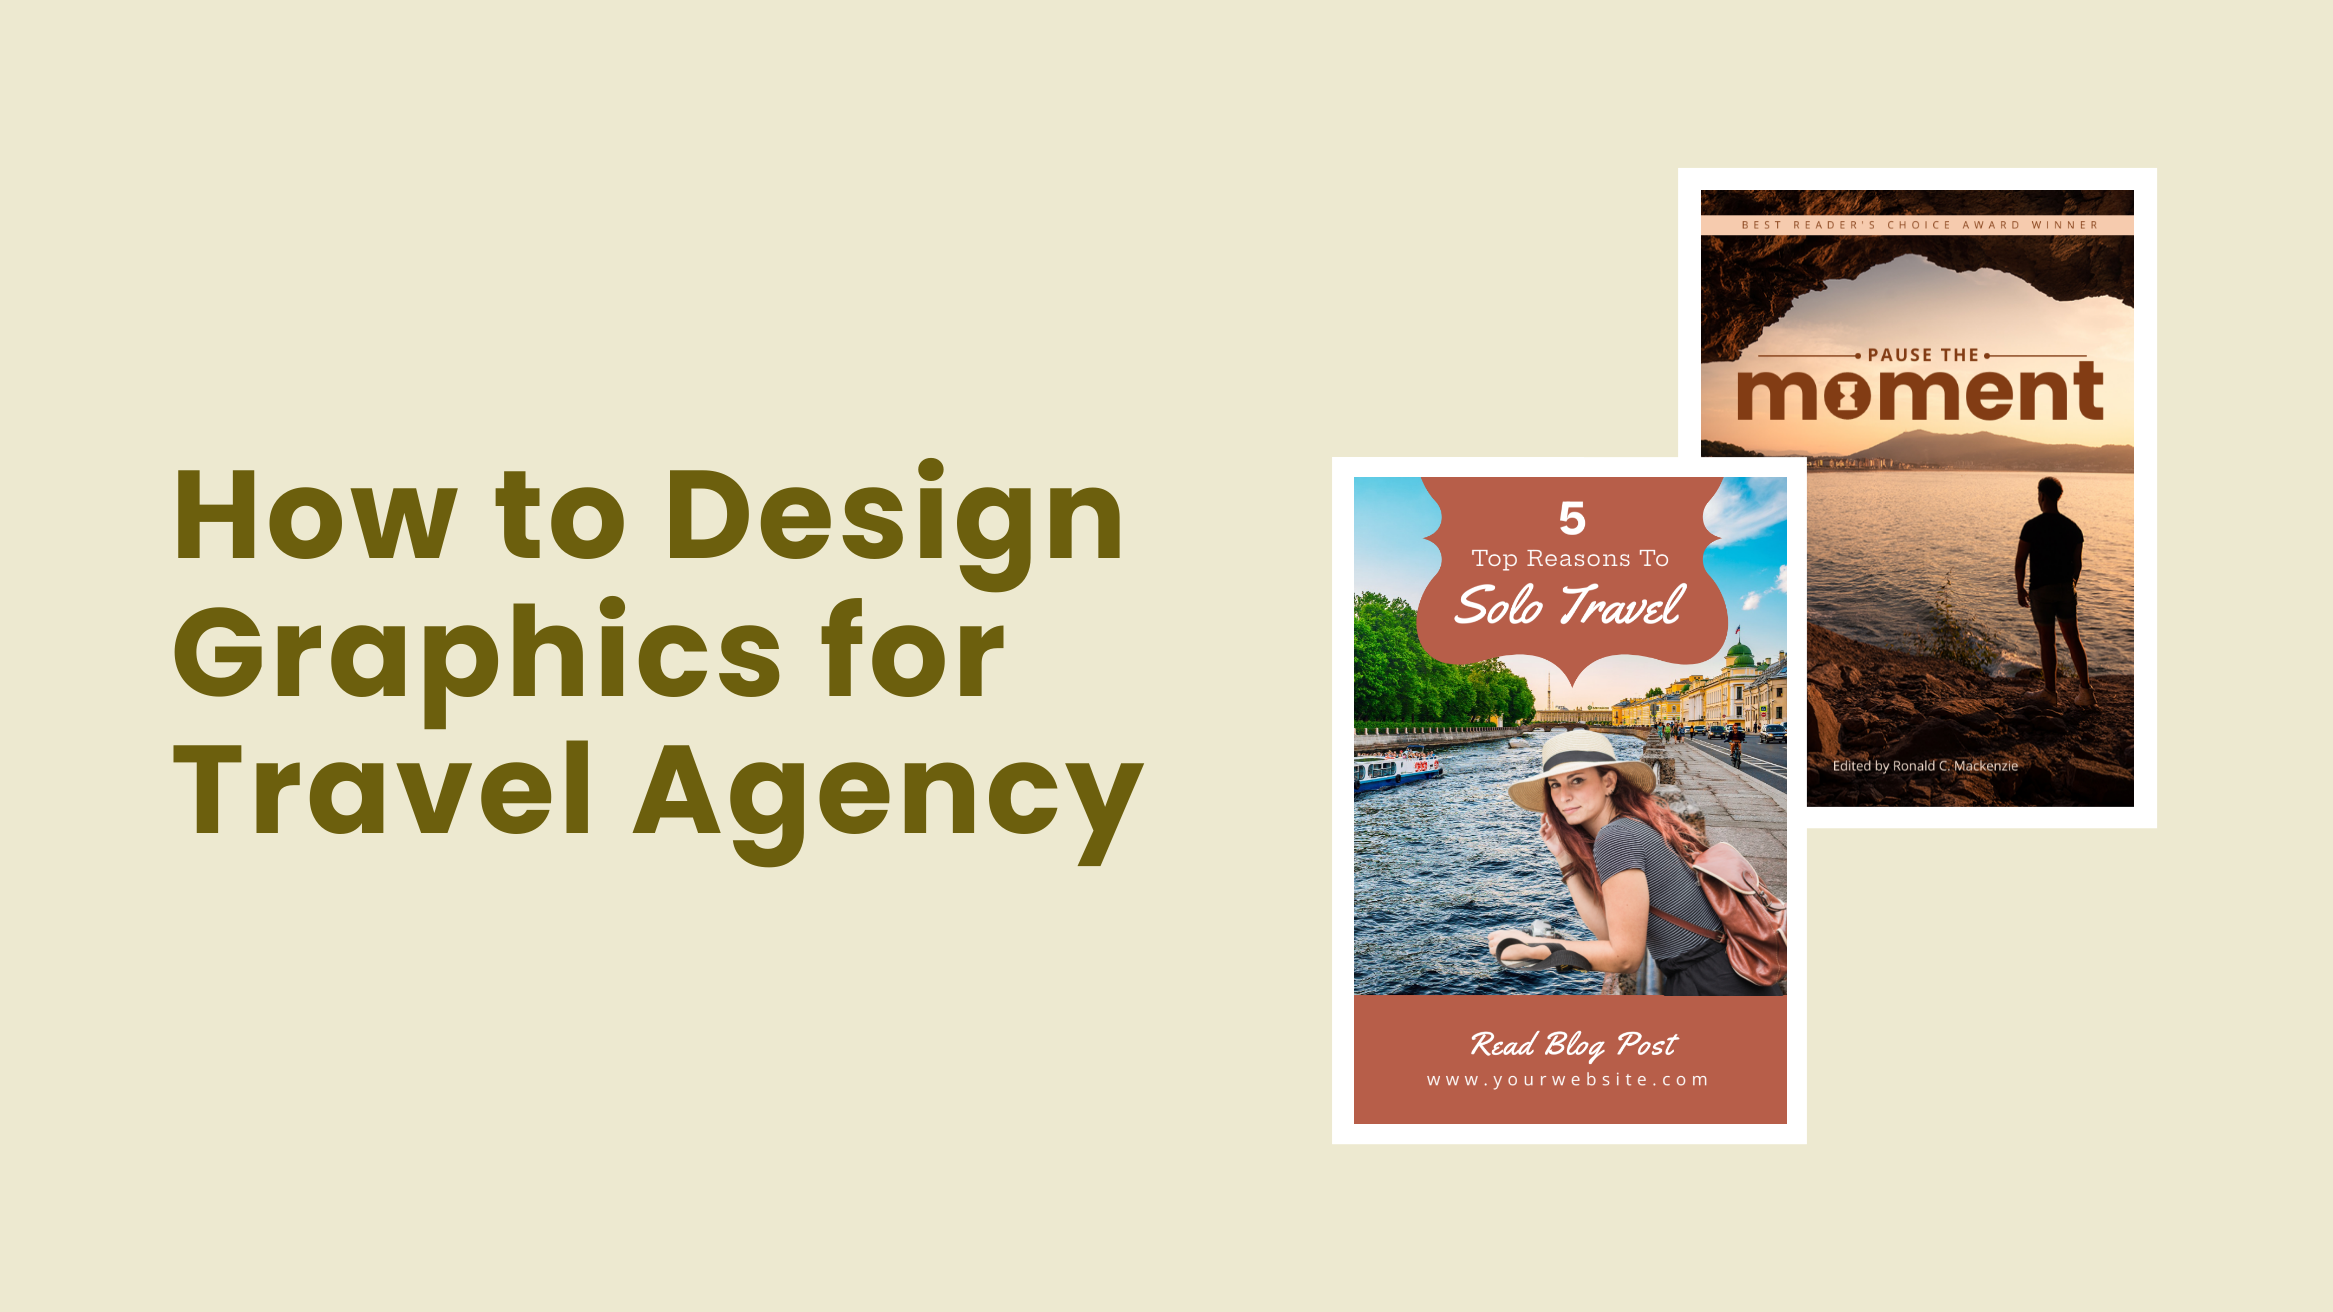 How to Design Graphics for Travel Agency